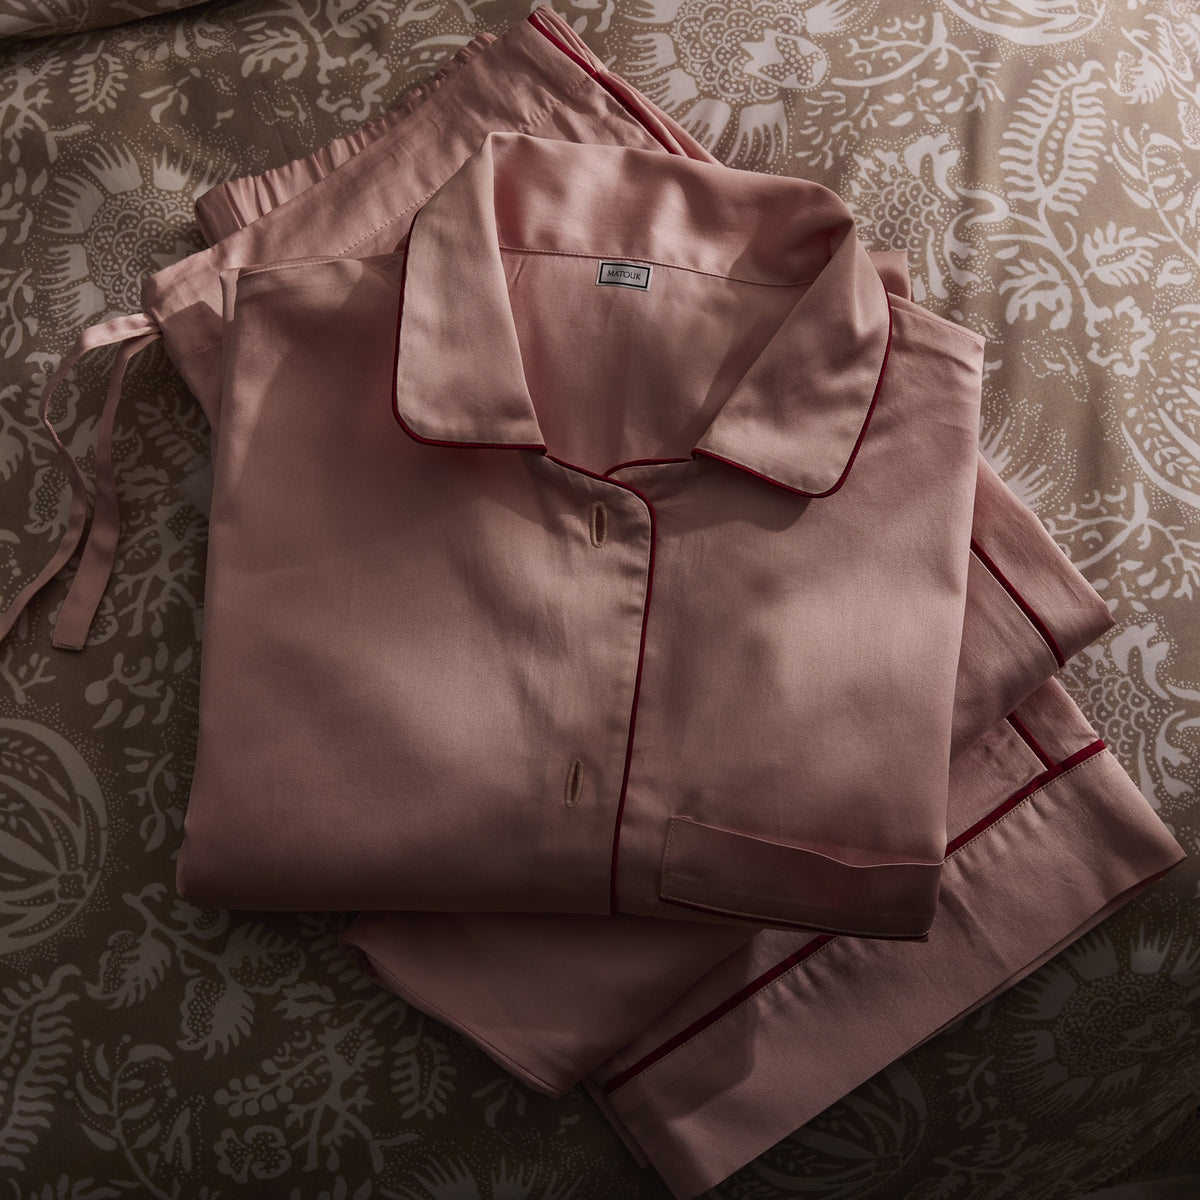 Detail Shot of Matouk Nocturne Pajama Set in Pink and Scarlet Color